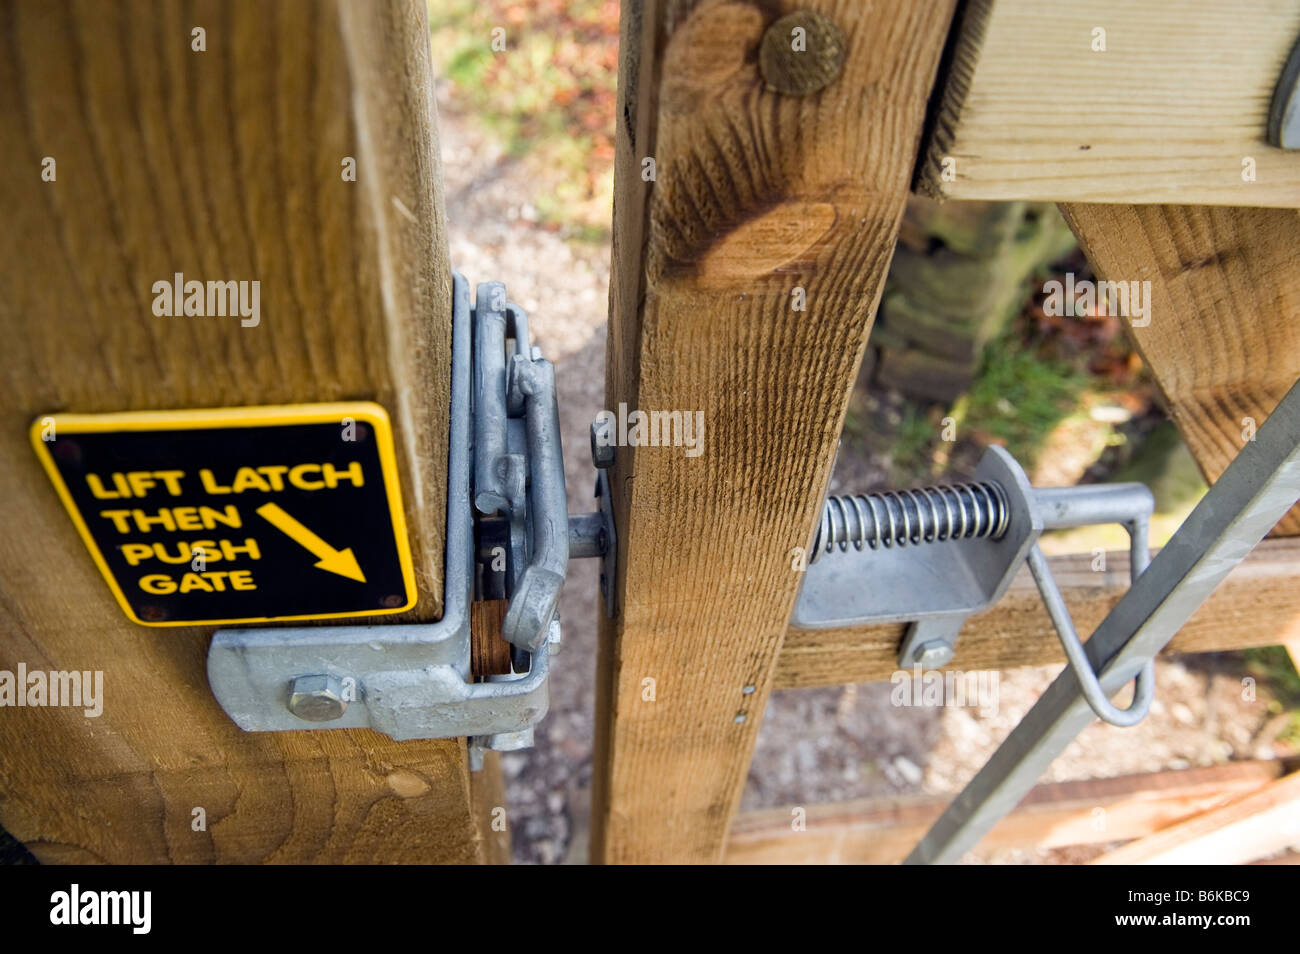 Latch on a wooden two way opening gate Stock Photo